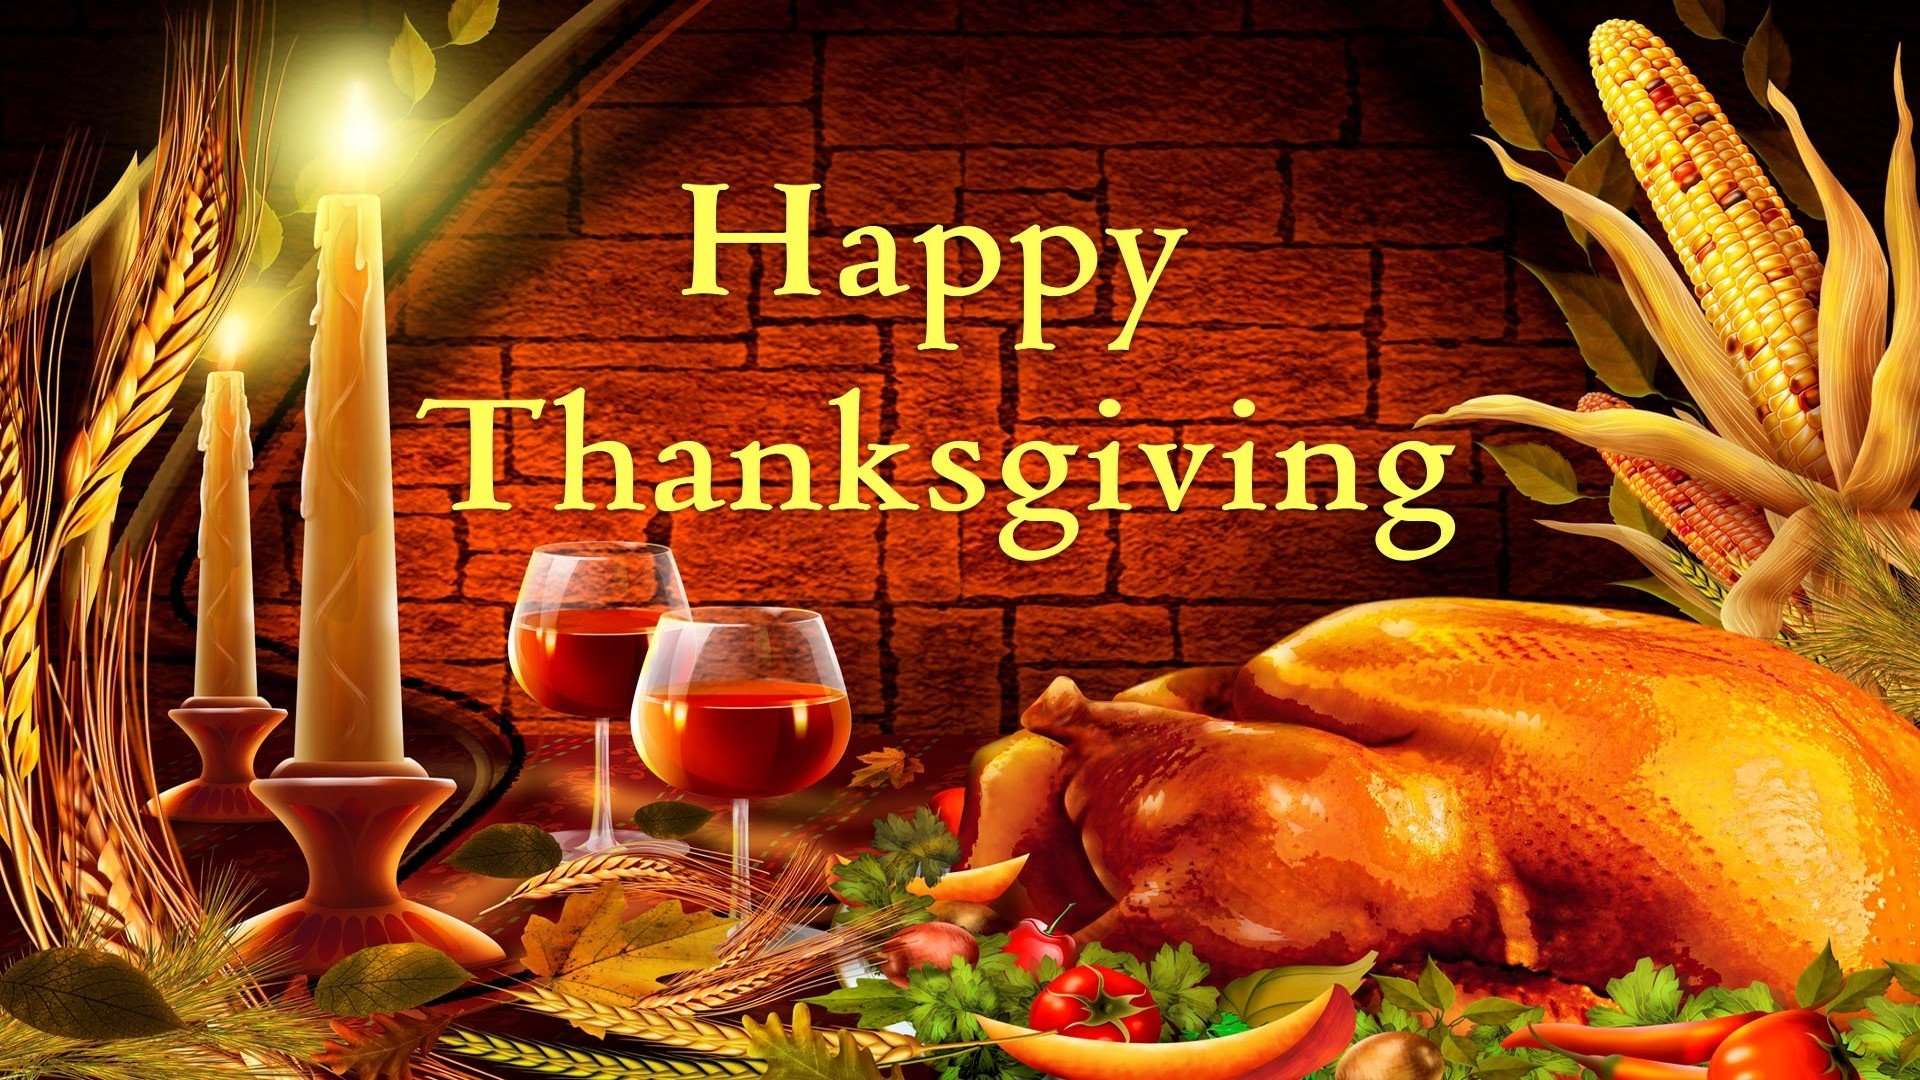 1920x1080 Thanksgiving Wallpaper And Backgrounds Funny Doblelolcom 